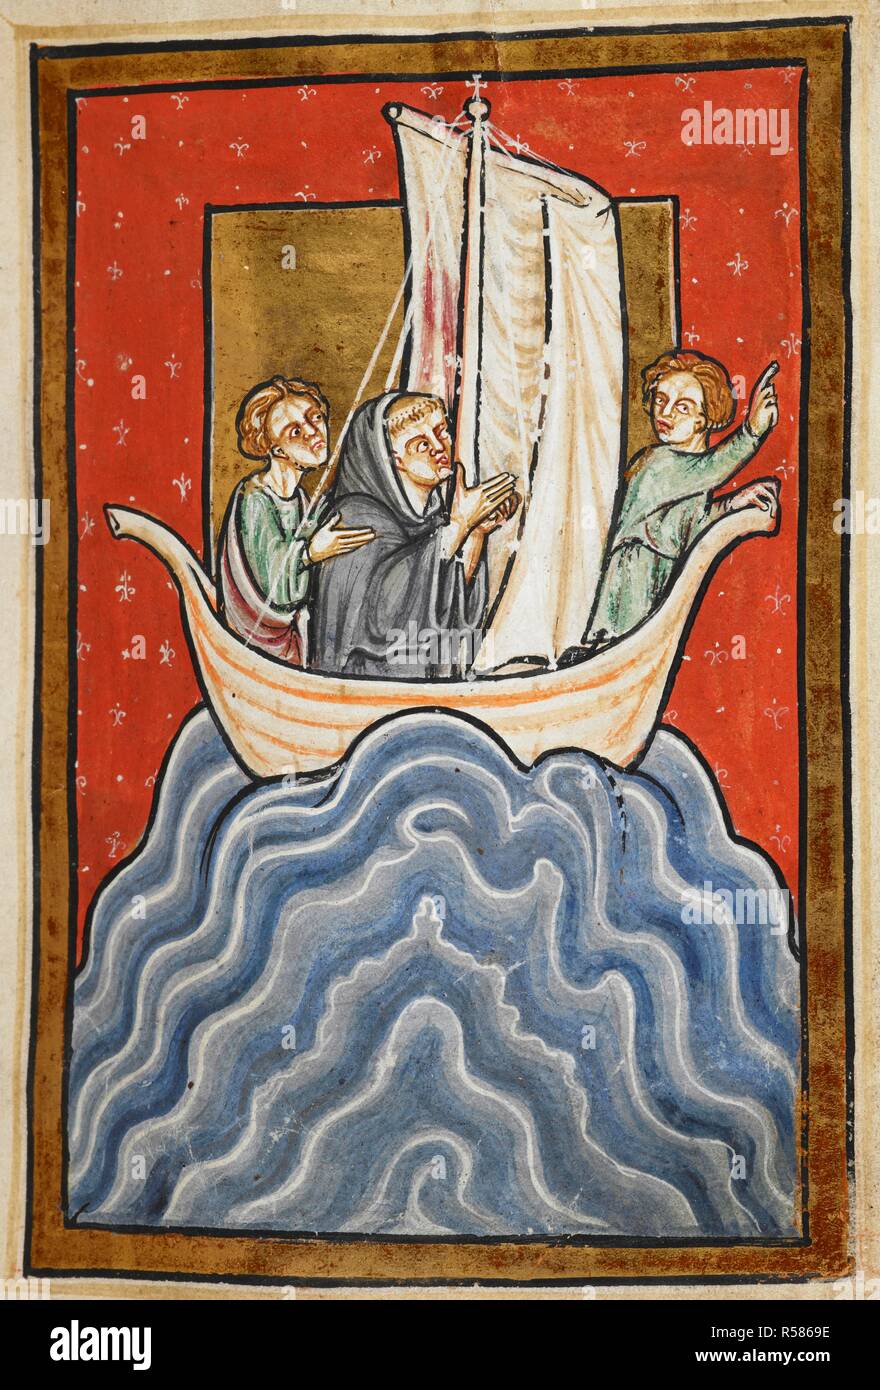 St. Cuthbert and two of the brethren sail to the land of the Picts. Prose Life of St. Cuthbert; extracts from the Historia Ecclesiastica (History of the English Church and People). Durham; last quarter of 12th century. Source: Yates Thompson 26, f.26. Language: Latin. Author: Bede. Stock Photo